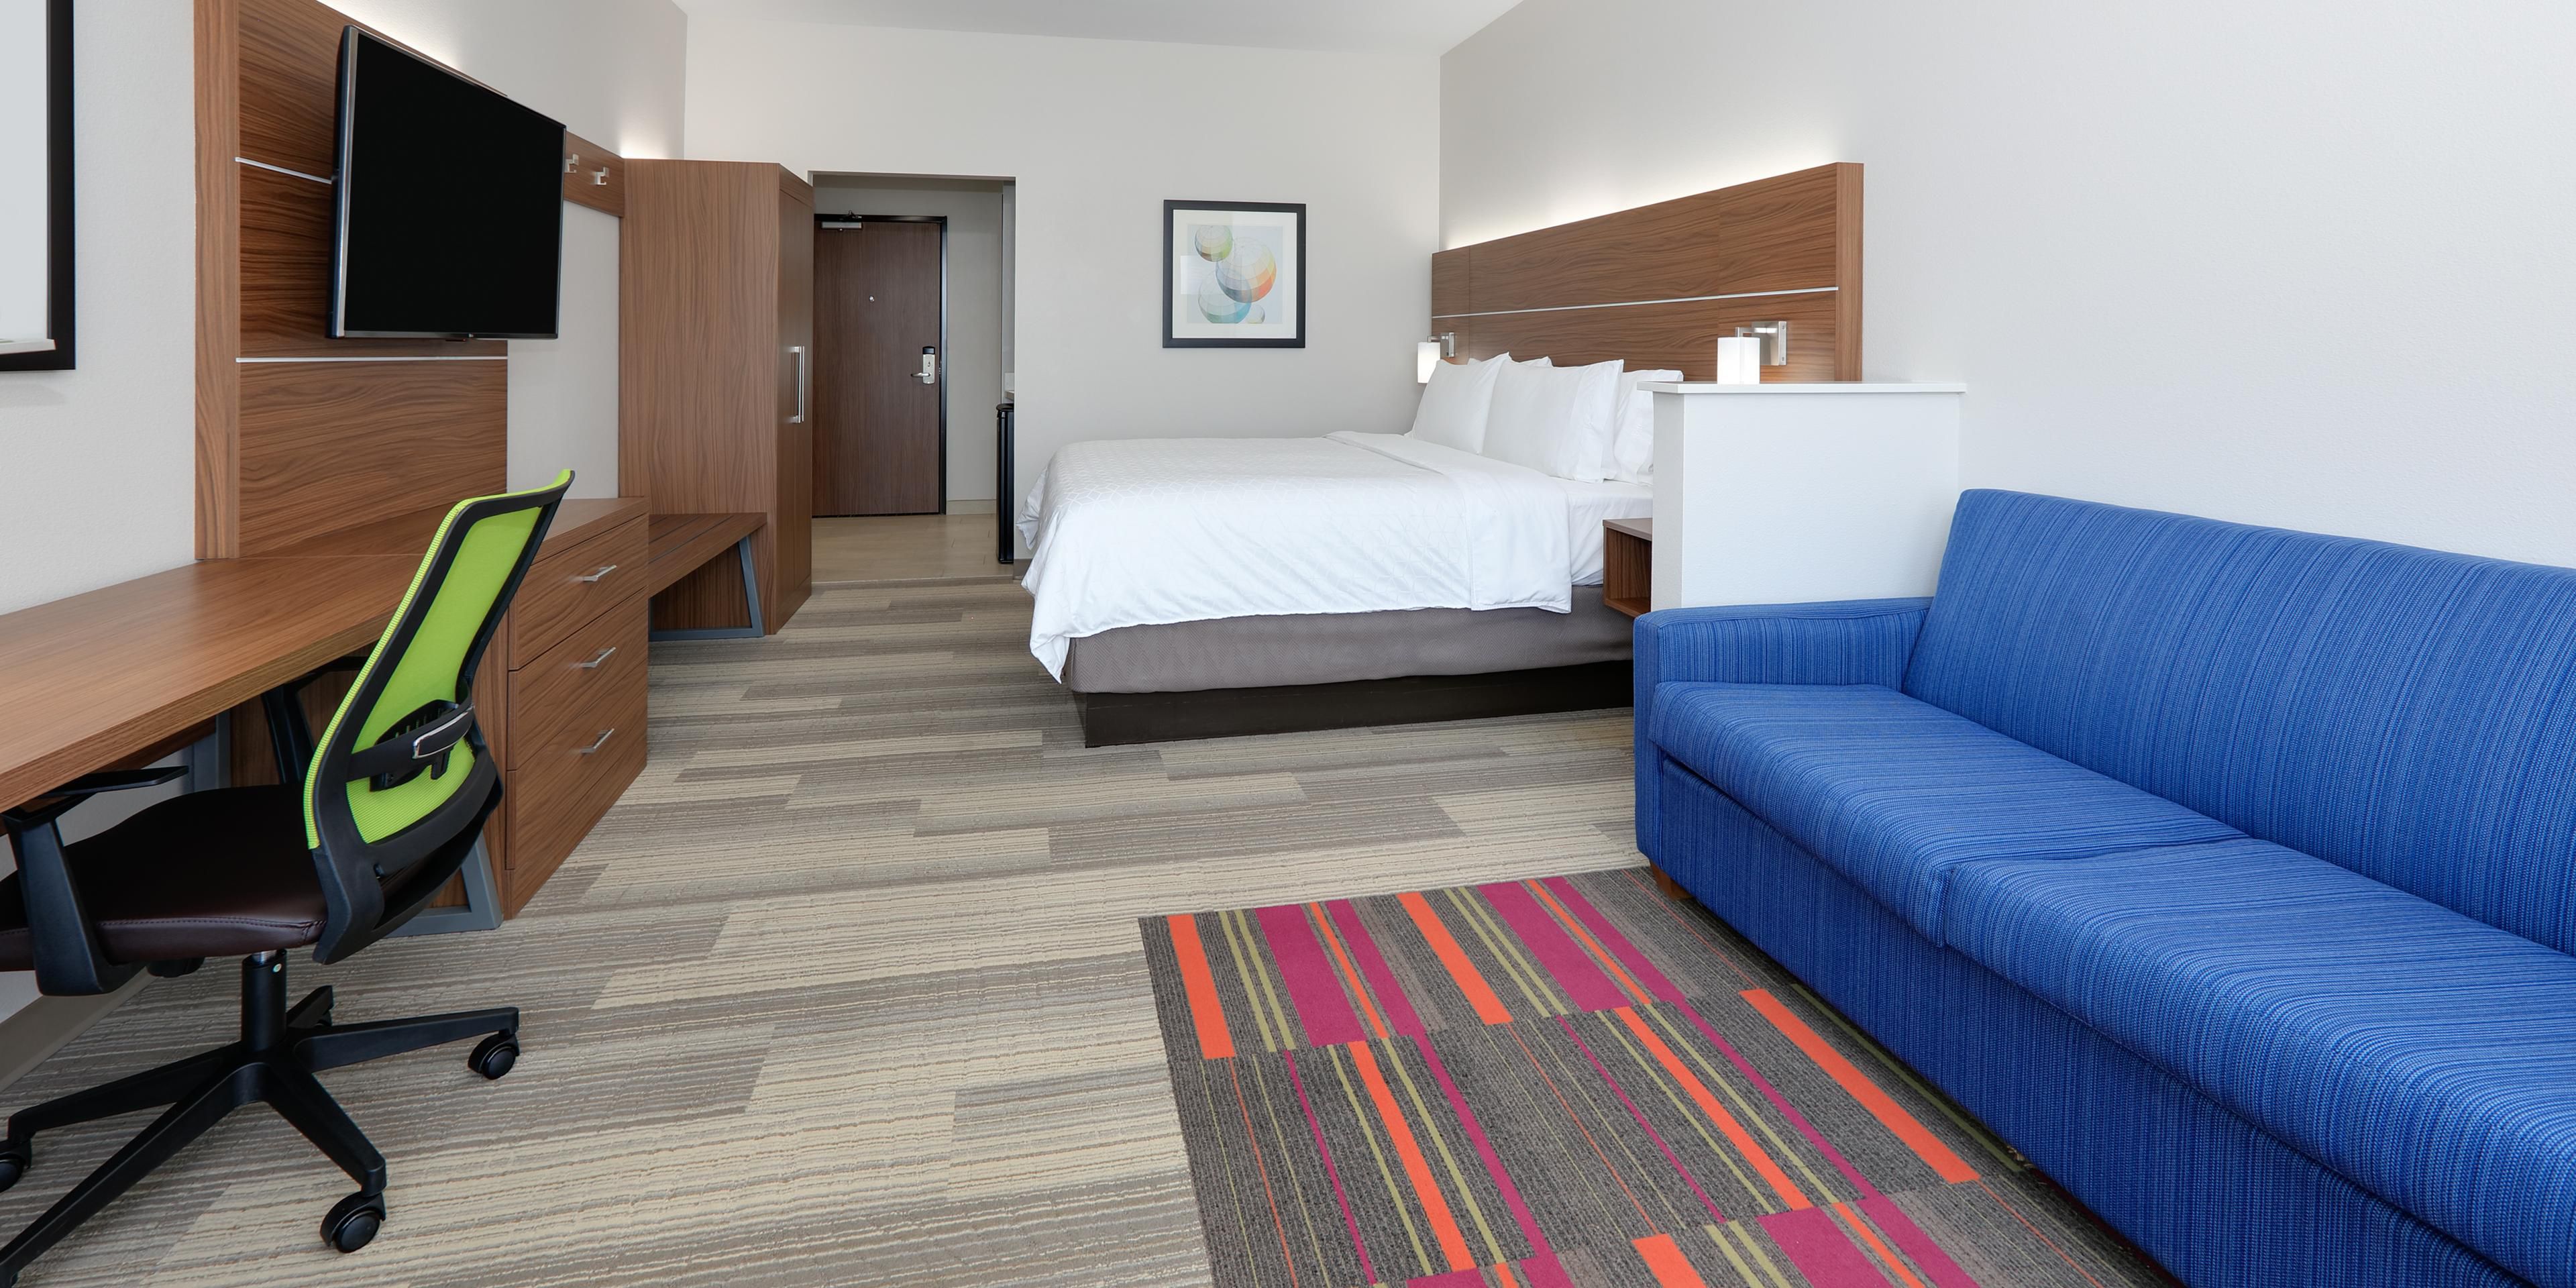 Visiting Amplified Live for a night of live music and good food? Come across the parking lot for a comfortable bed and complimentary breakfast before heading back home. 